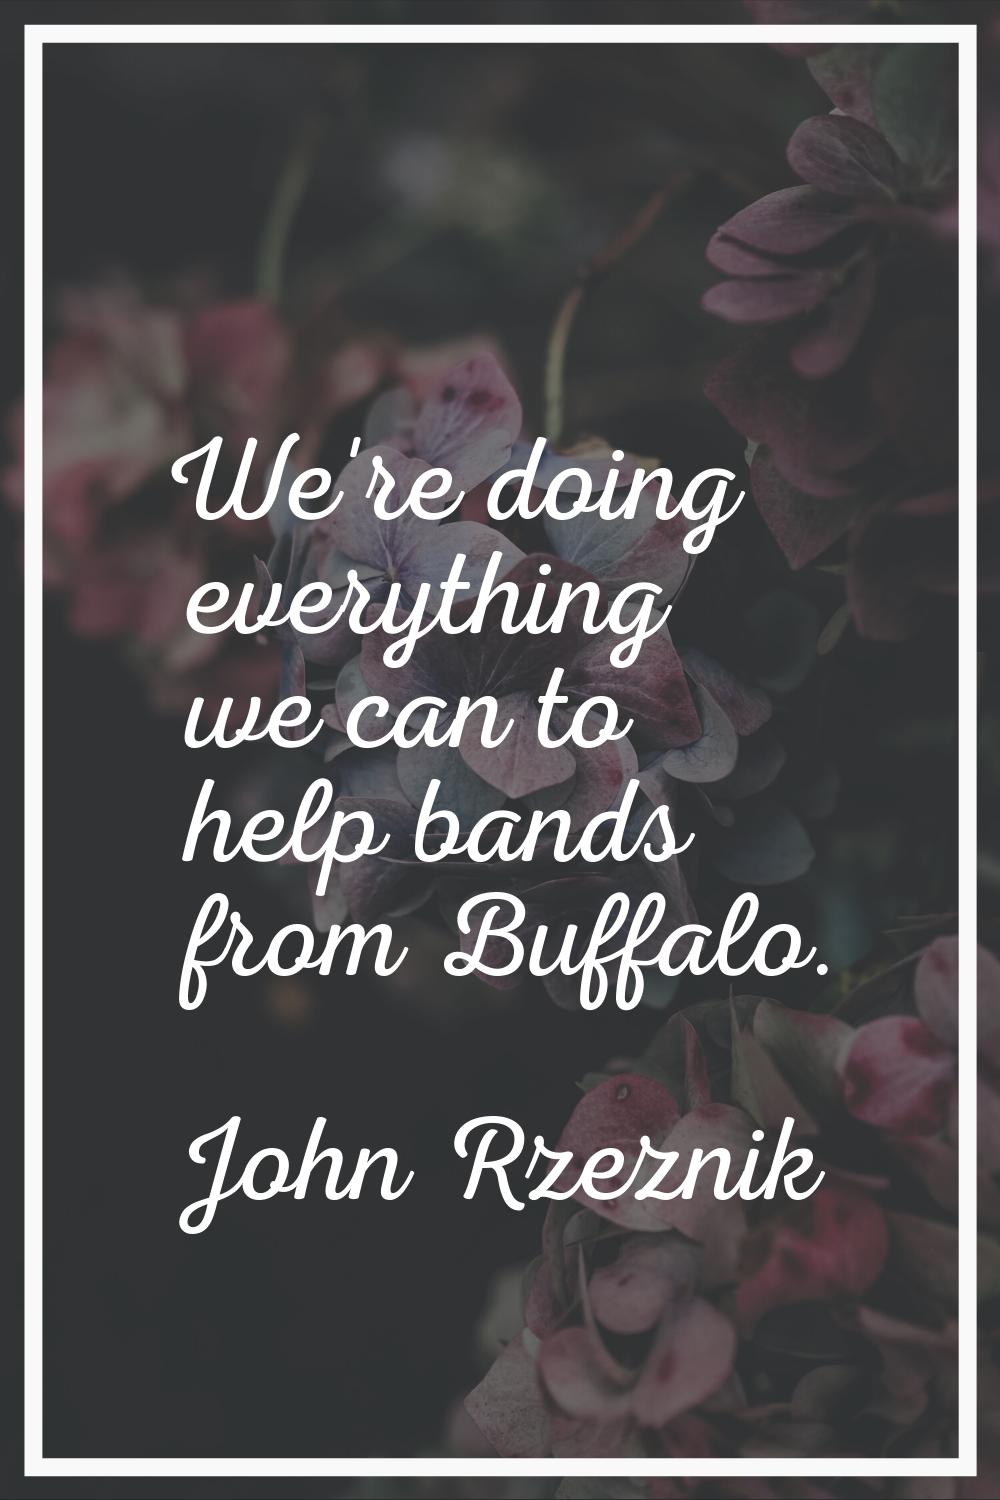 We're doing everything we can to help bands from Buffalo.